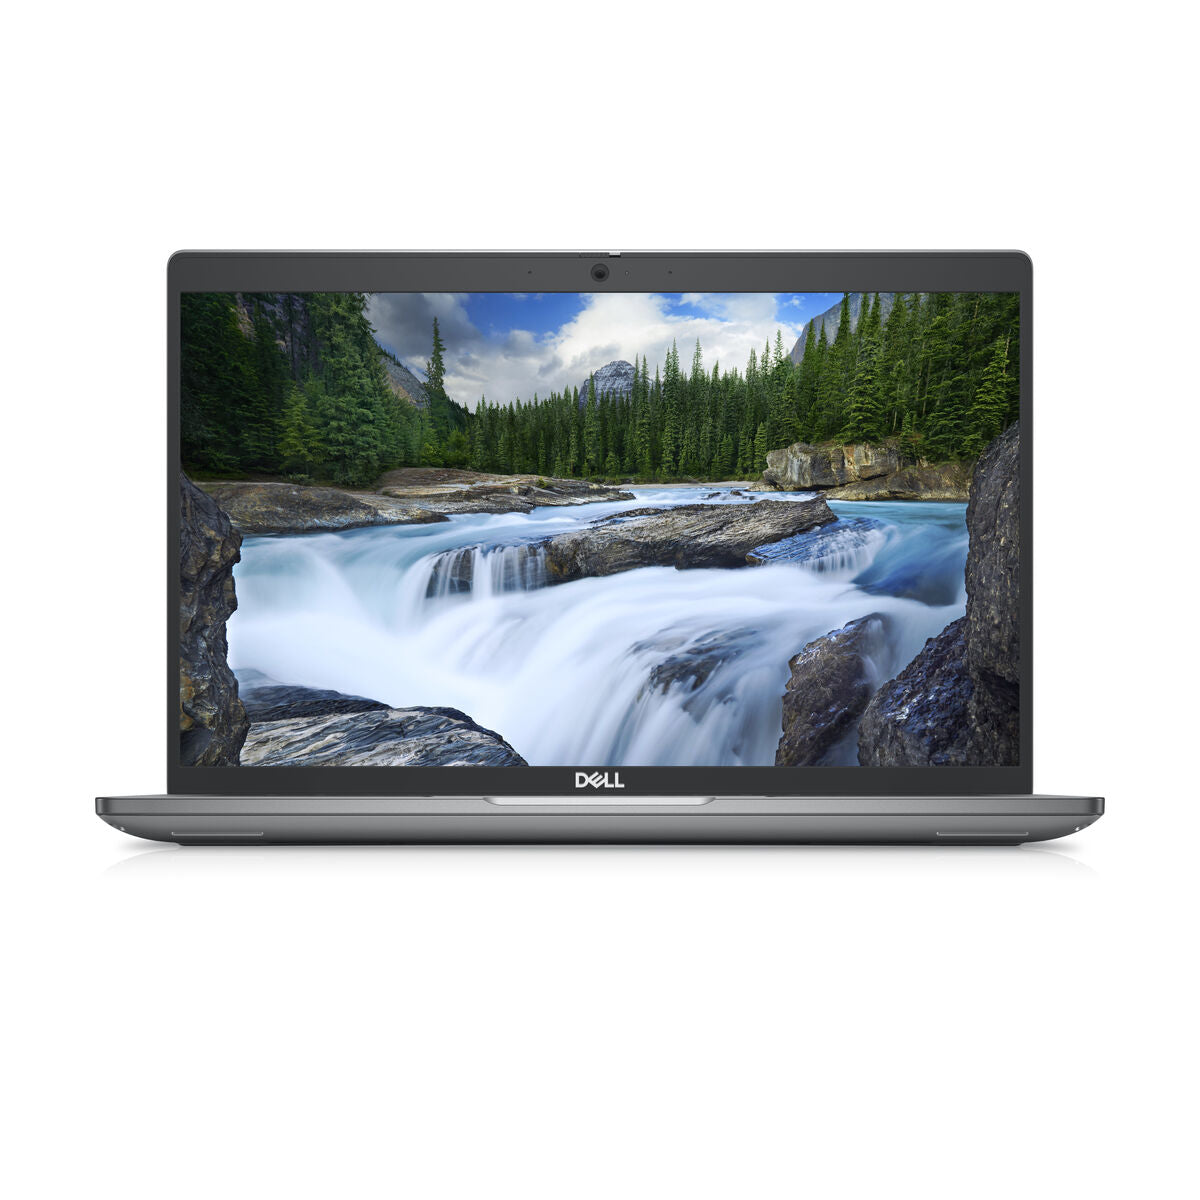 Laptop Dell V0V0Y 14" i5-1335U 512 GB SSD Spanish Qwerty, Dell, Computing, notebook-dell-v0v0y-512-gb-ssd-16-gb-ram-14-i5-1335u-spanish-qwerty, :2-in-1, :512 GB, :Intel-i5, :QWERTY, :RAM 16 GB, :Touchscreen, Brand_Dell, category-reference-2609, category-reference-2791, category-reference-2797, category-reference-t-19685, Condition_NEW, office, Price_+ 1000, Teleworking, RiotNook